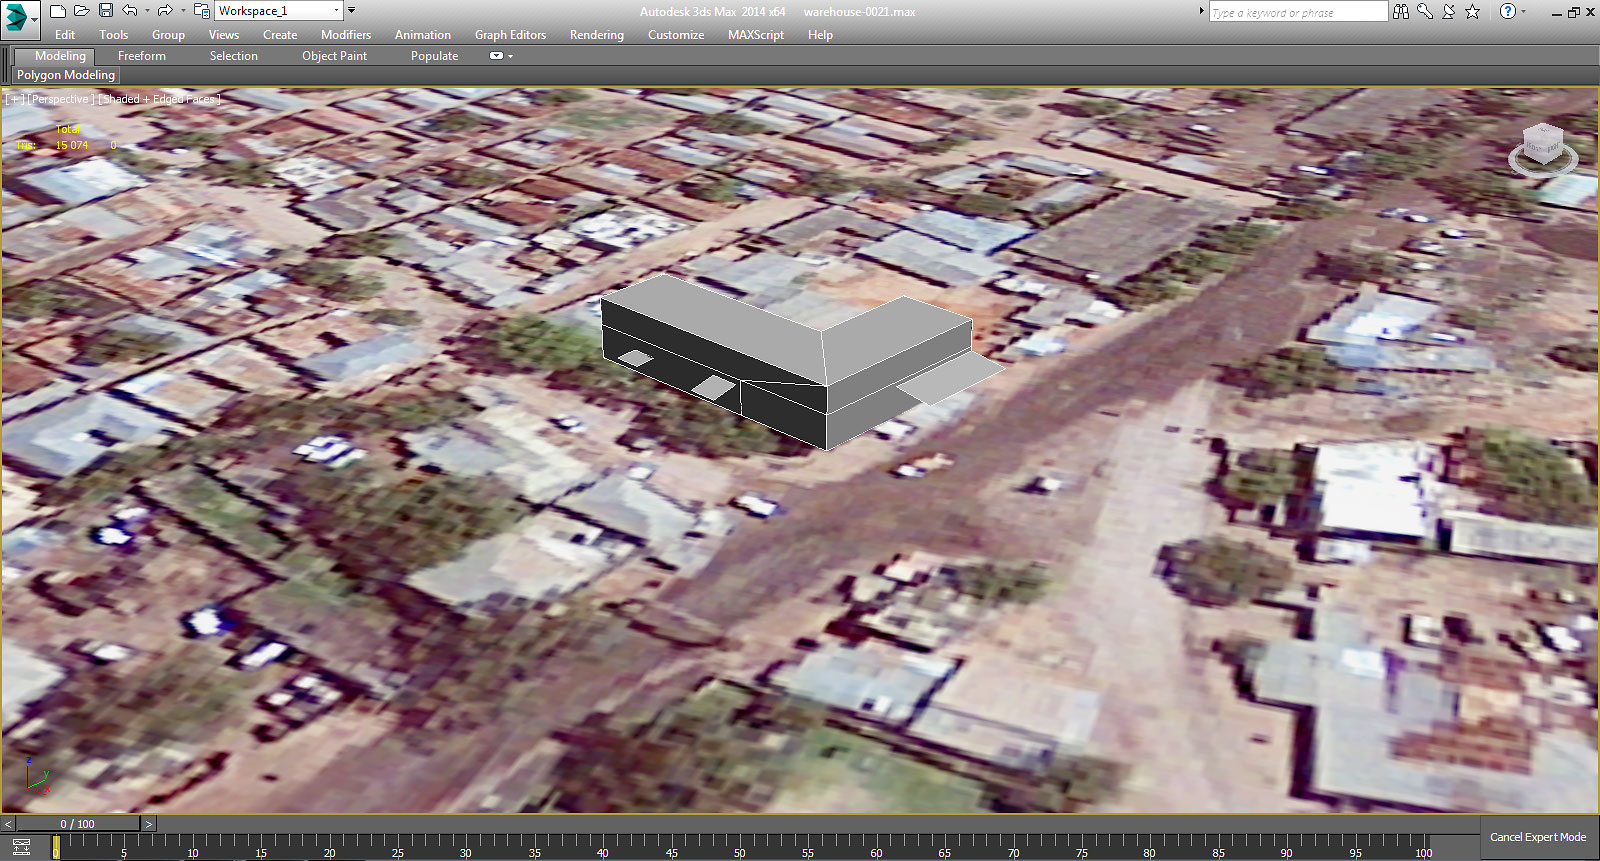 Basic mesh of the model positioned on the building footprint on the terrain imagery.